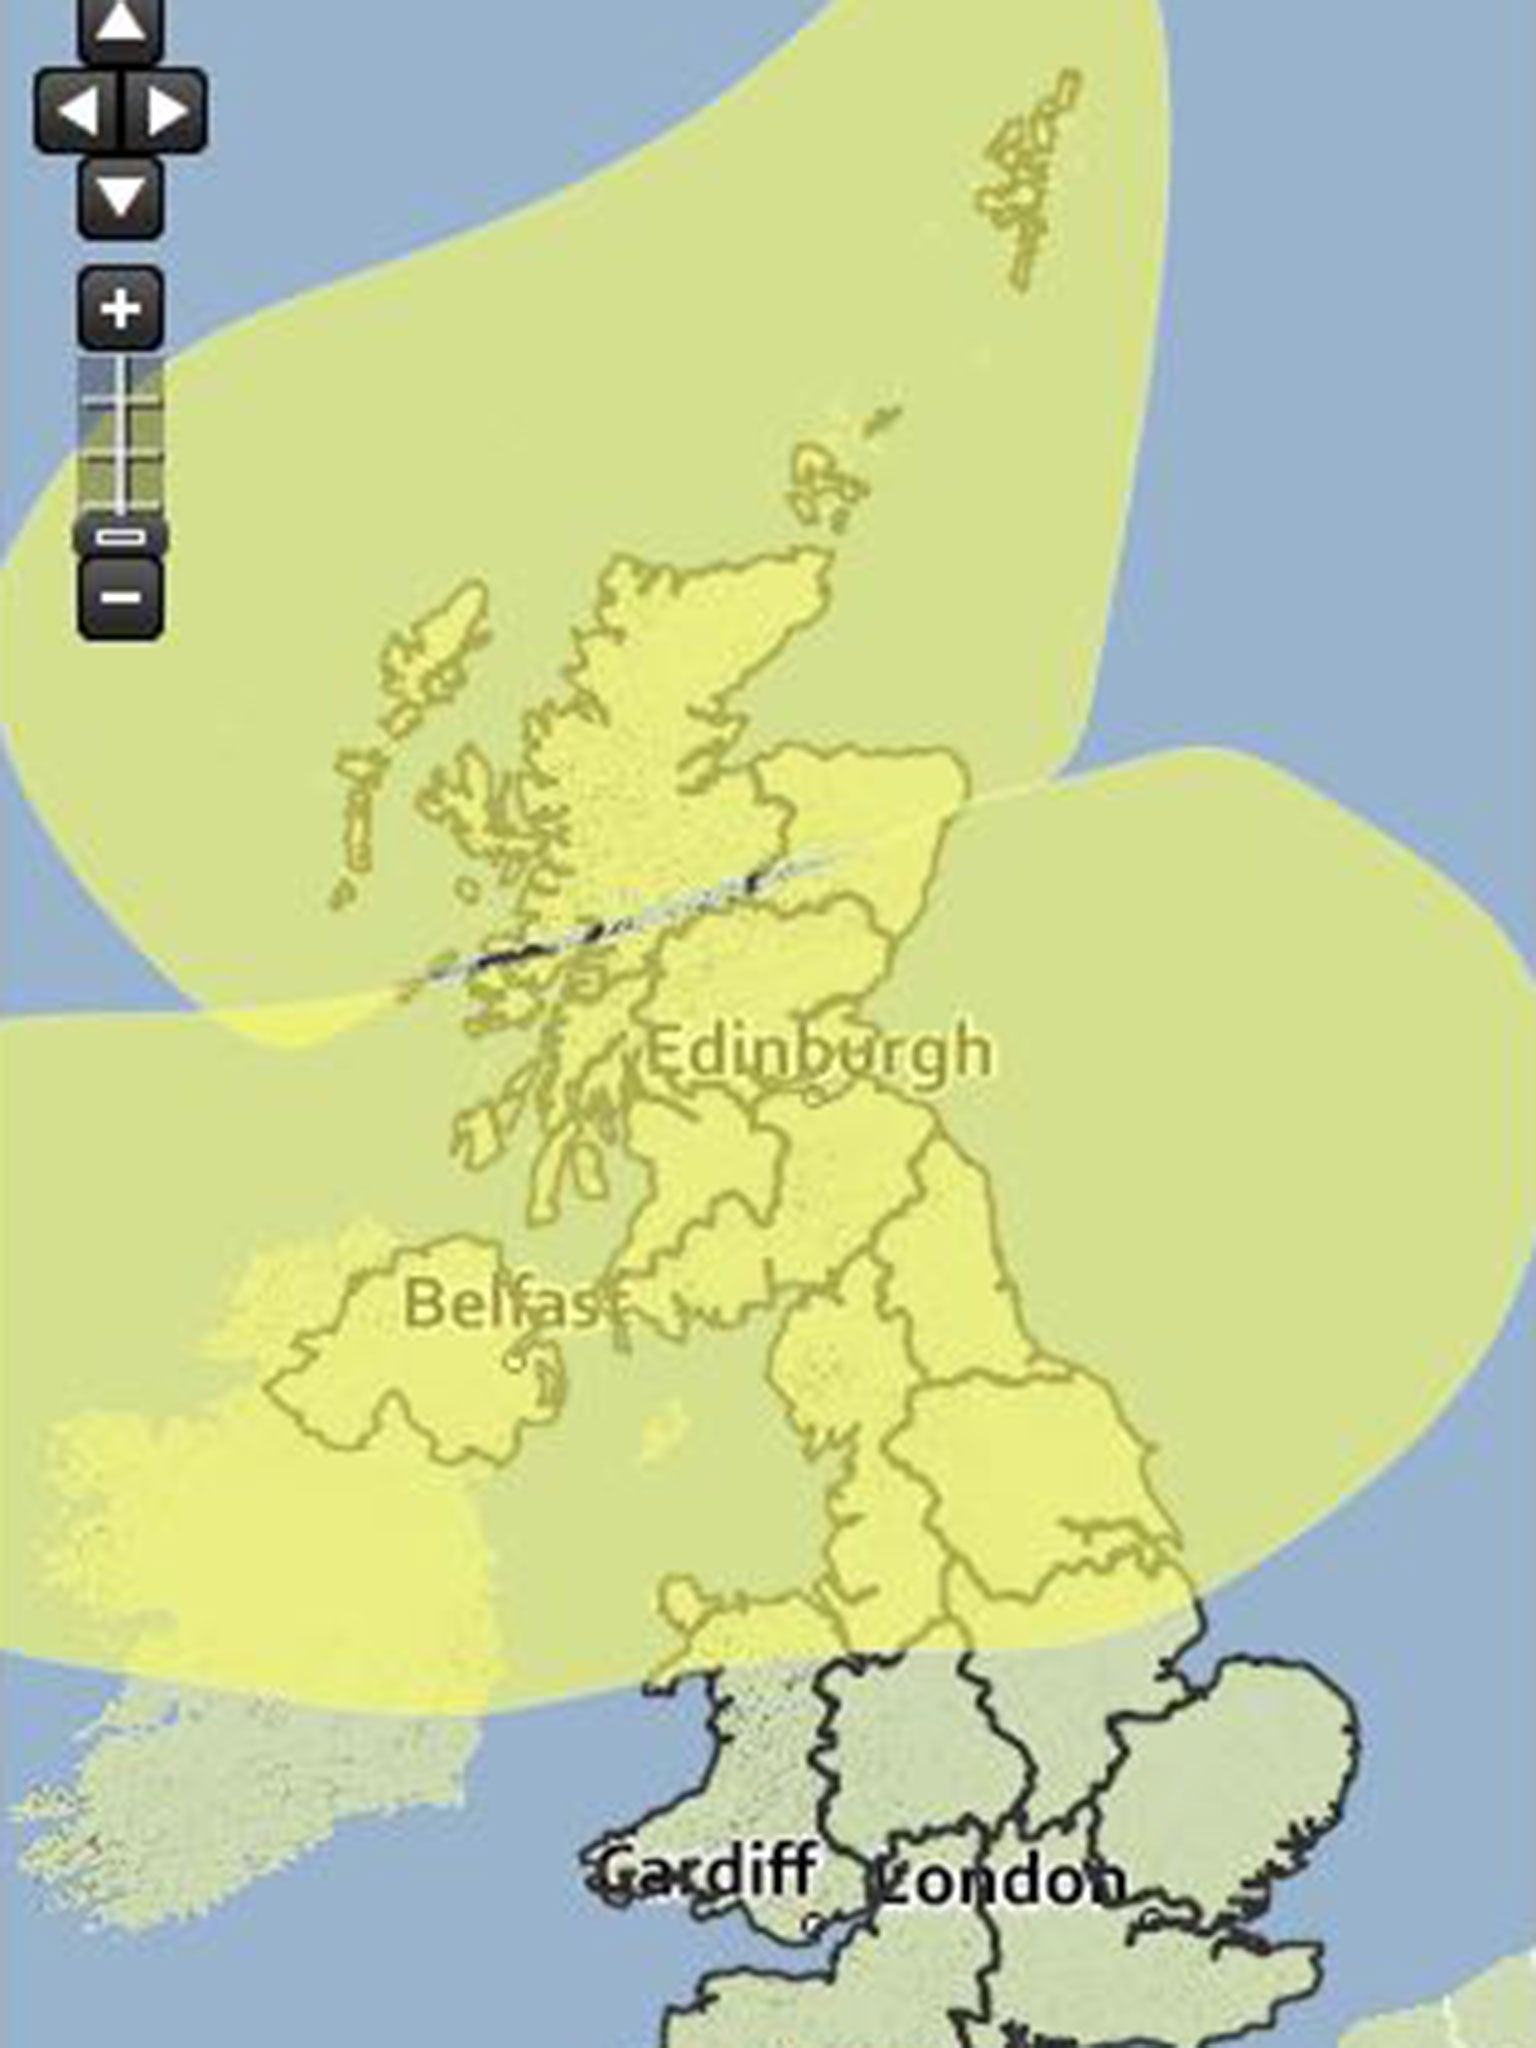 Weather warnings issued by the Met Office for Saturday